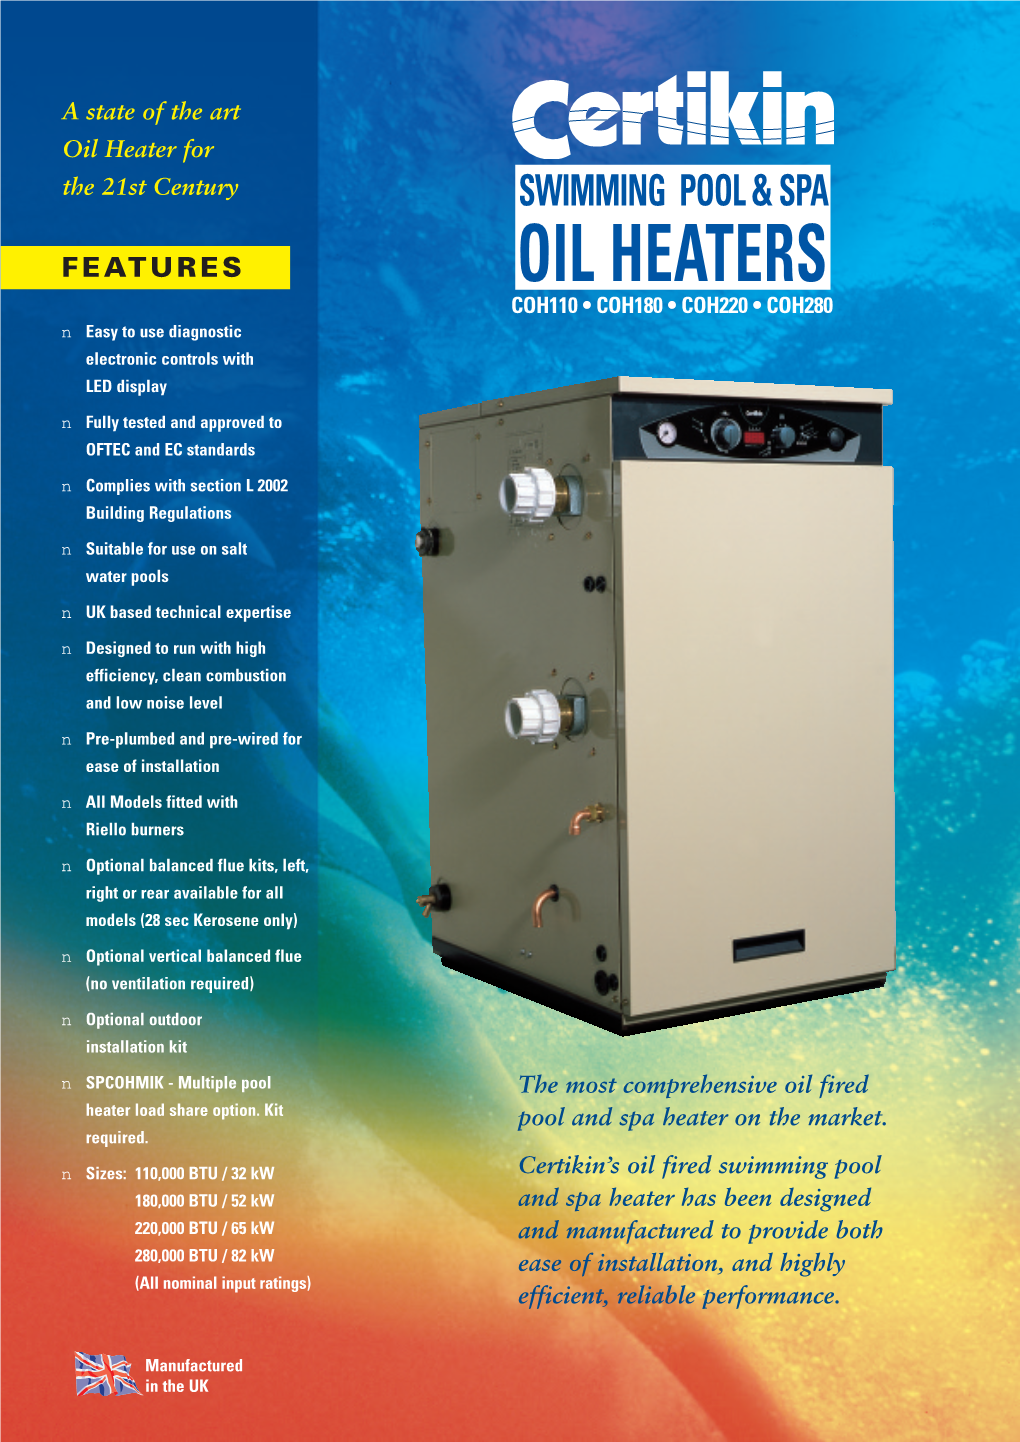 Certikin Oil Heater Has Been Designed with All Plumbing and Electrical Connections on the Left Hand Side of the Unit, As Shown